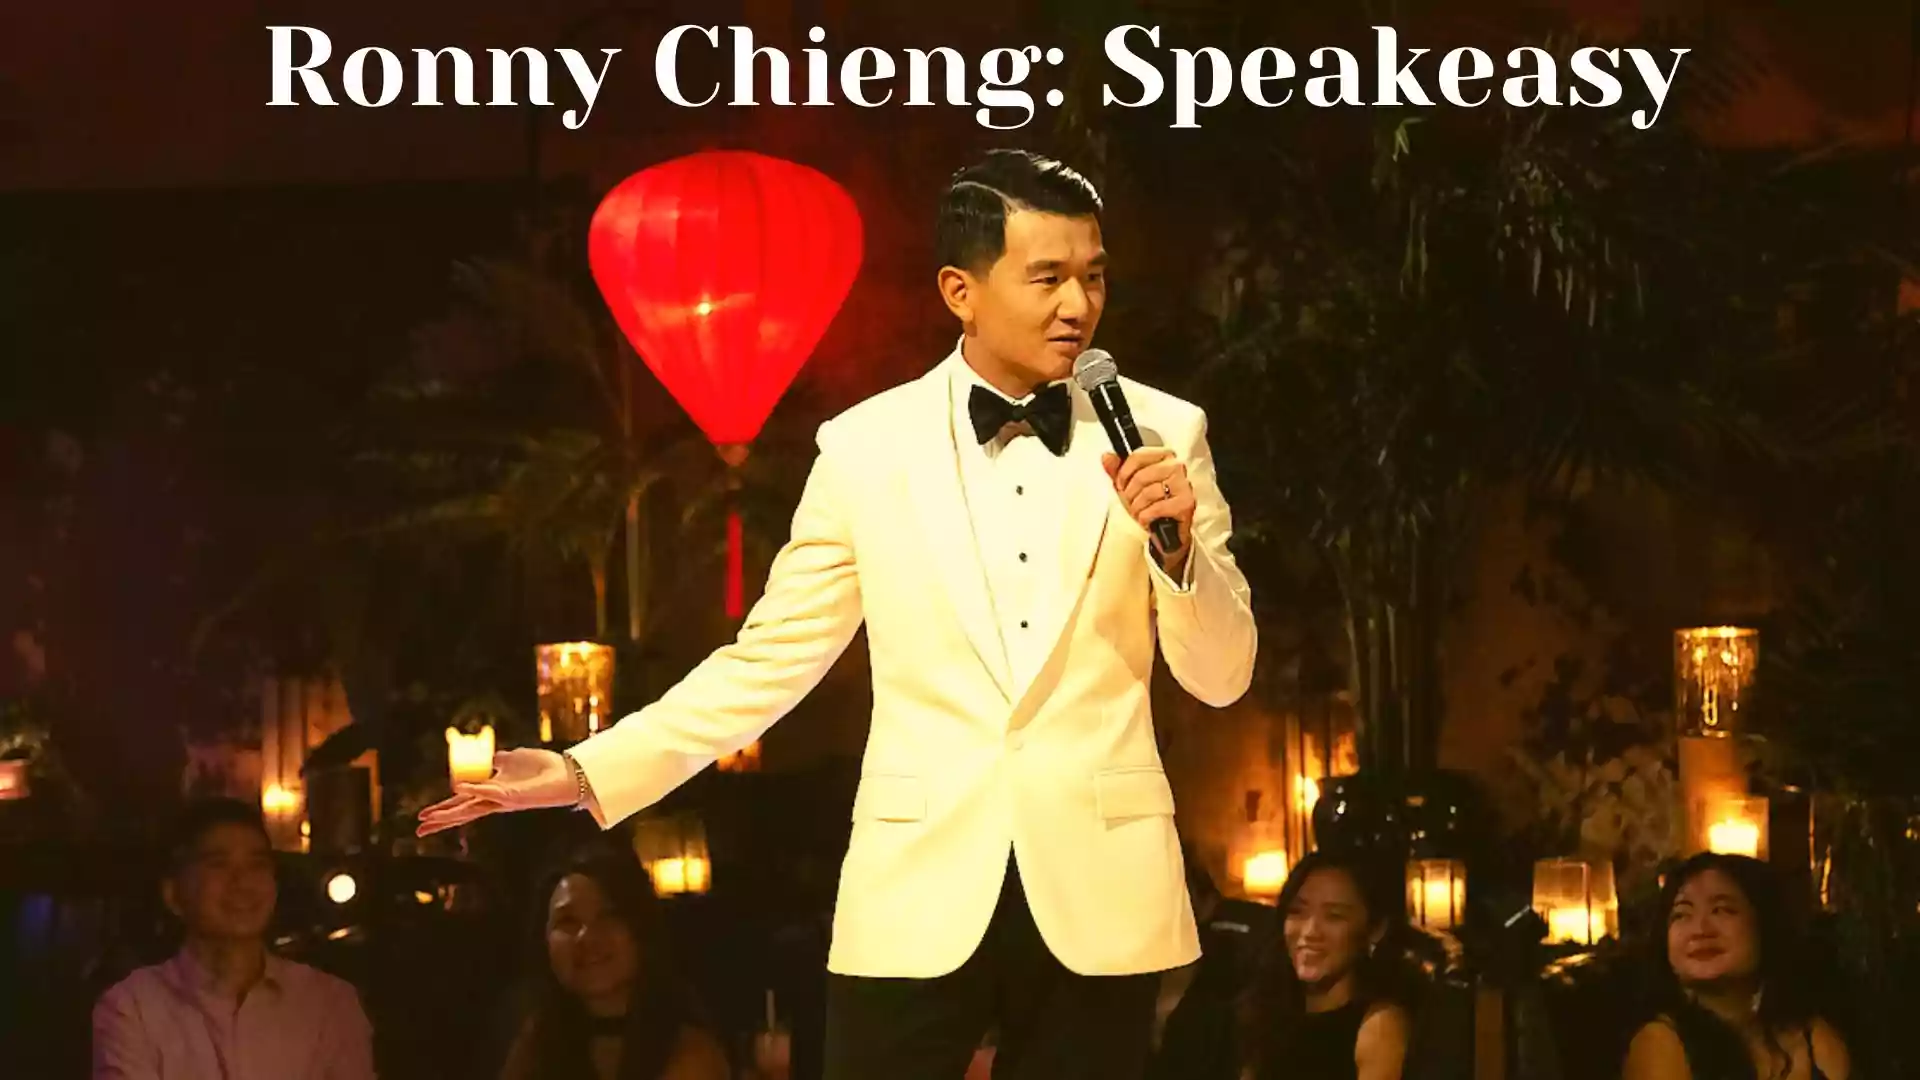 Ronny Chieng Speakeasy Wallpaper and Image